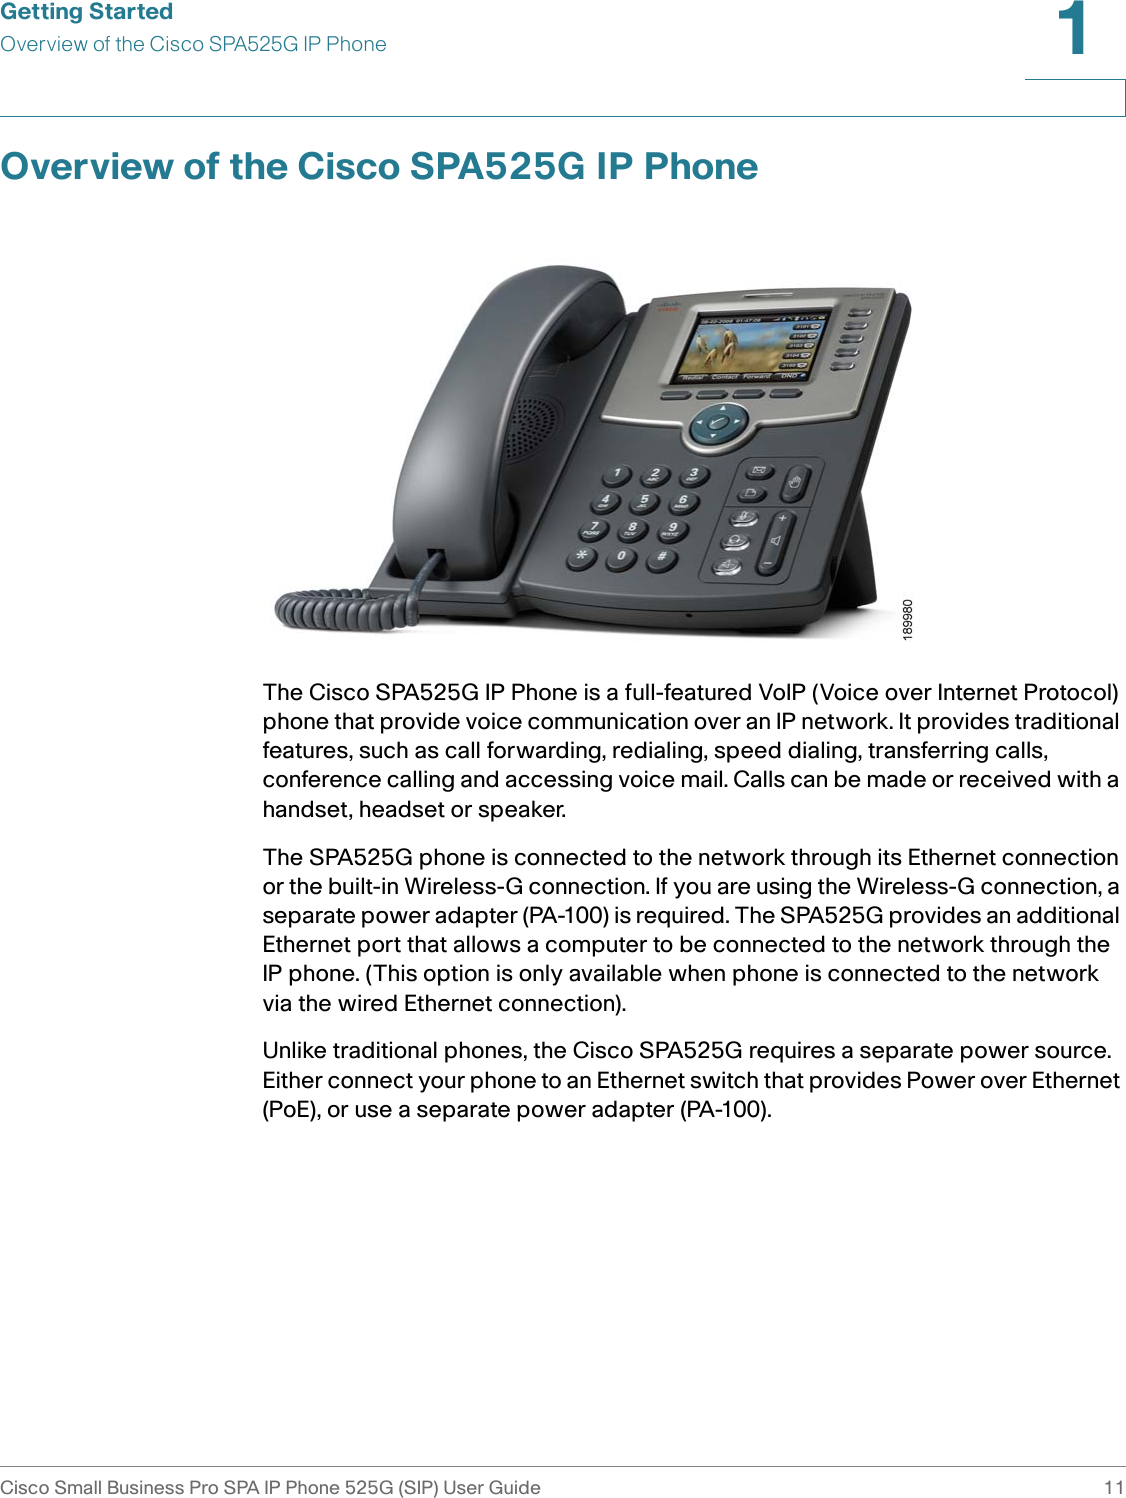 Getting StartedOverview of the Cisco SPA525G IP PhoneCisco Small Business Pro SPA IP Phone 525G (SIP) User Guide 111 Overview of the Cisco SPA525G IP PhoneThe Cisco SPA525G IP Phone is a full-featured VoIP (Voice over Internet Protocol) phone that provide voice communication over an IP network. It provides traditional features, such as call forwarding, redialing, speed dialing, transferring calls, conference calling and accessing voice mail. Calls can be made or received with a handset, headset or speaker. The SPA525G phone is connected to the network through its Ethernet connection or the built-in Wireless-G connection. If you are using the Wireless-G connection, a separate power adapter (PA-100) is required. The SPA525G provides an additional Ethernet port that allows a computer to be connected to the network through the IP phone. (This option is only available when phone is connected to the network via the wired Ethernet connection).Unlike traditional phones, the Cisco SPA525G requires a separate power source. Either connect your phone to an Ethernet switch that provides Power over Ethernet (PoE), or use a separate power adapter (PA-100).